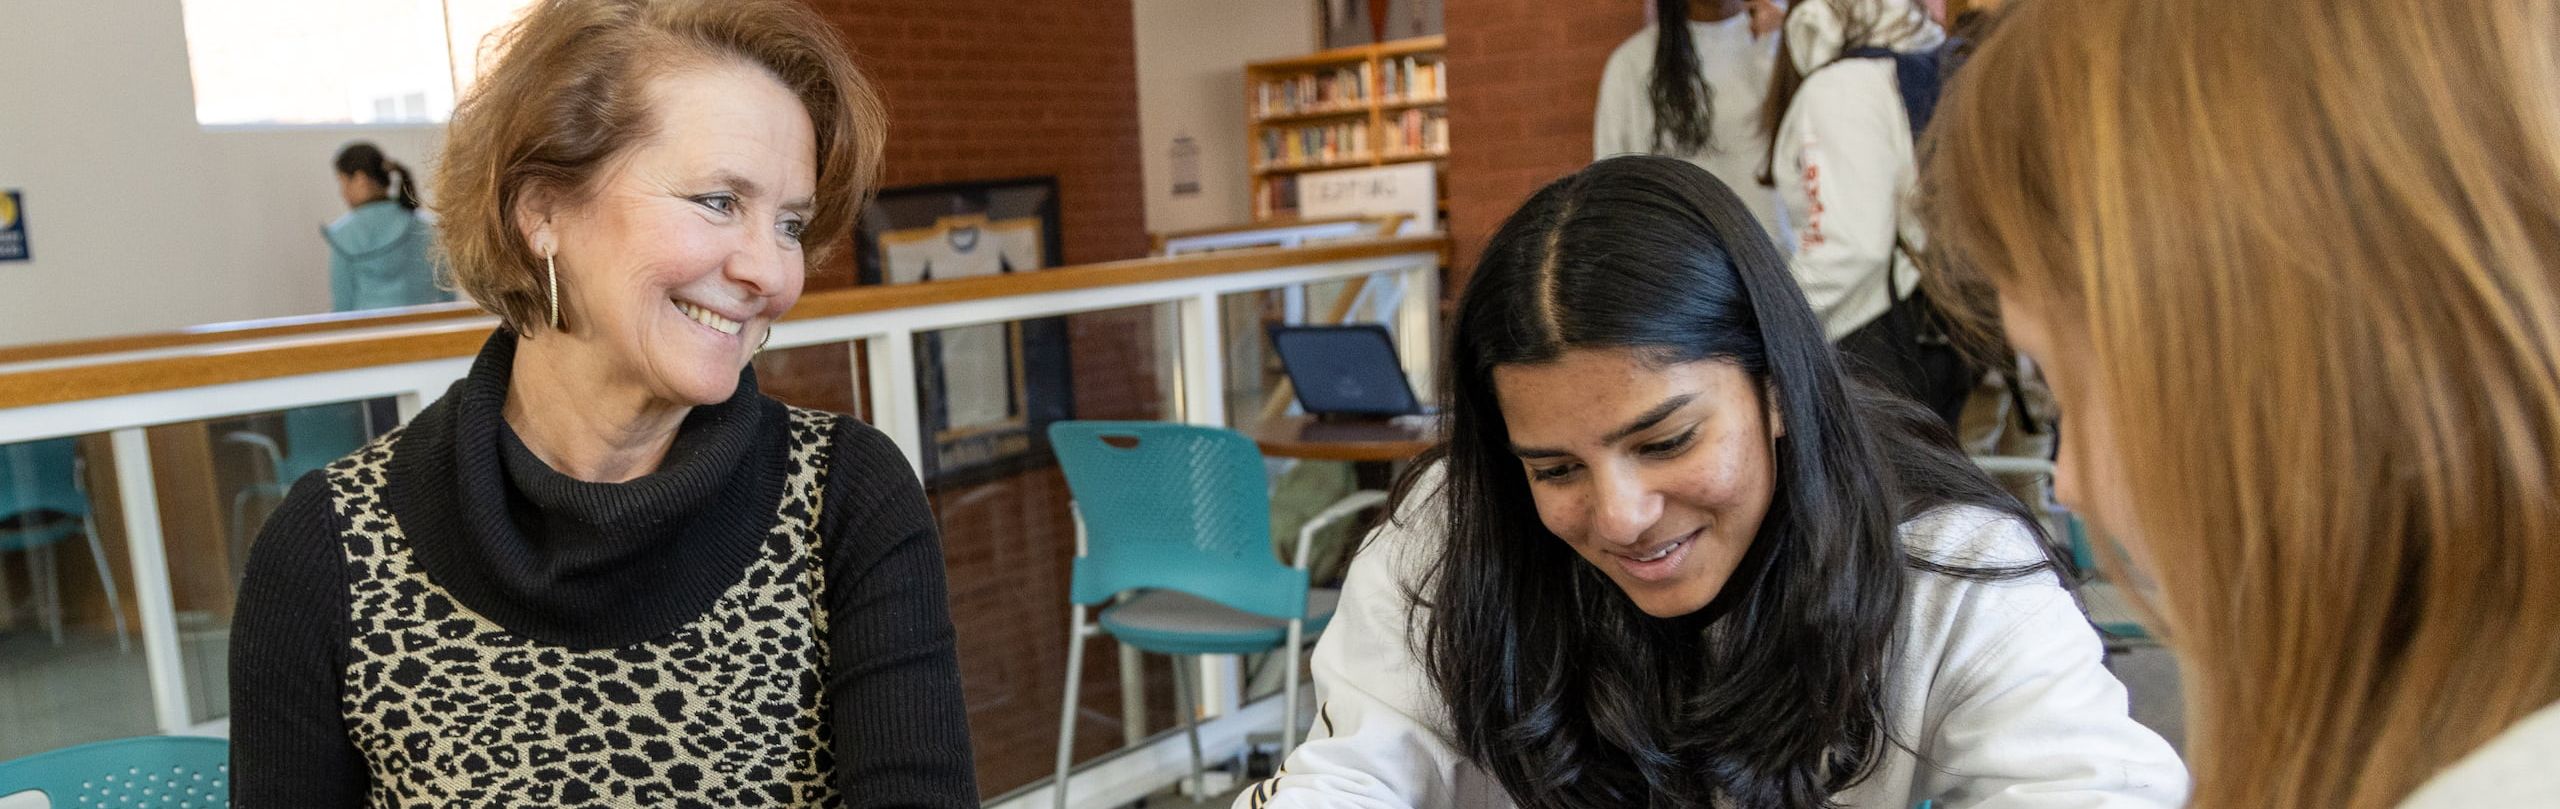 A smiling teacher engaging with a female student who is focused on writing in a notebook at a round table in a library, with other students in the background.